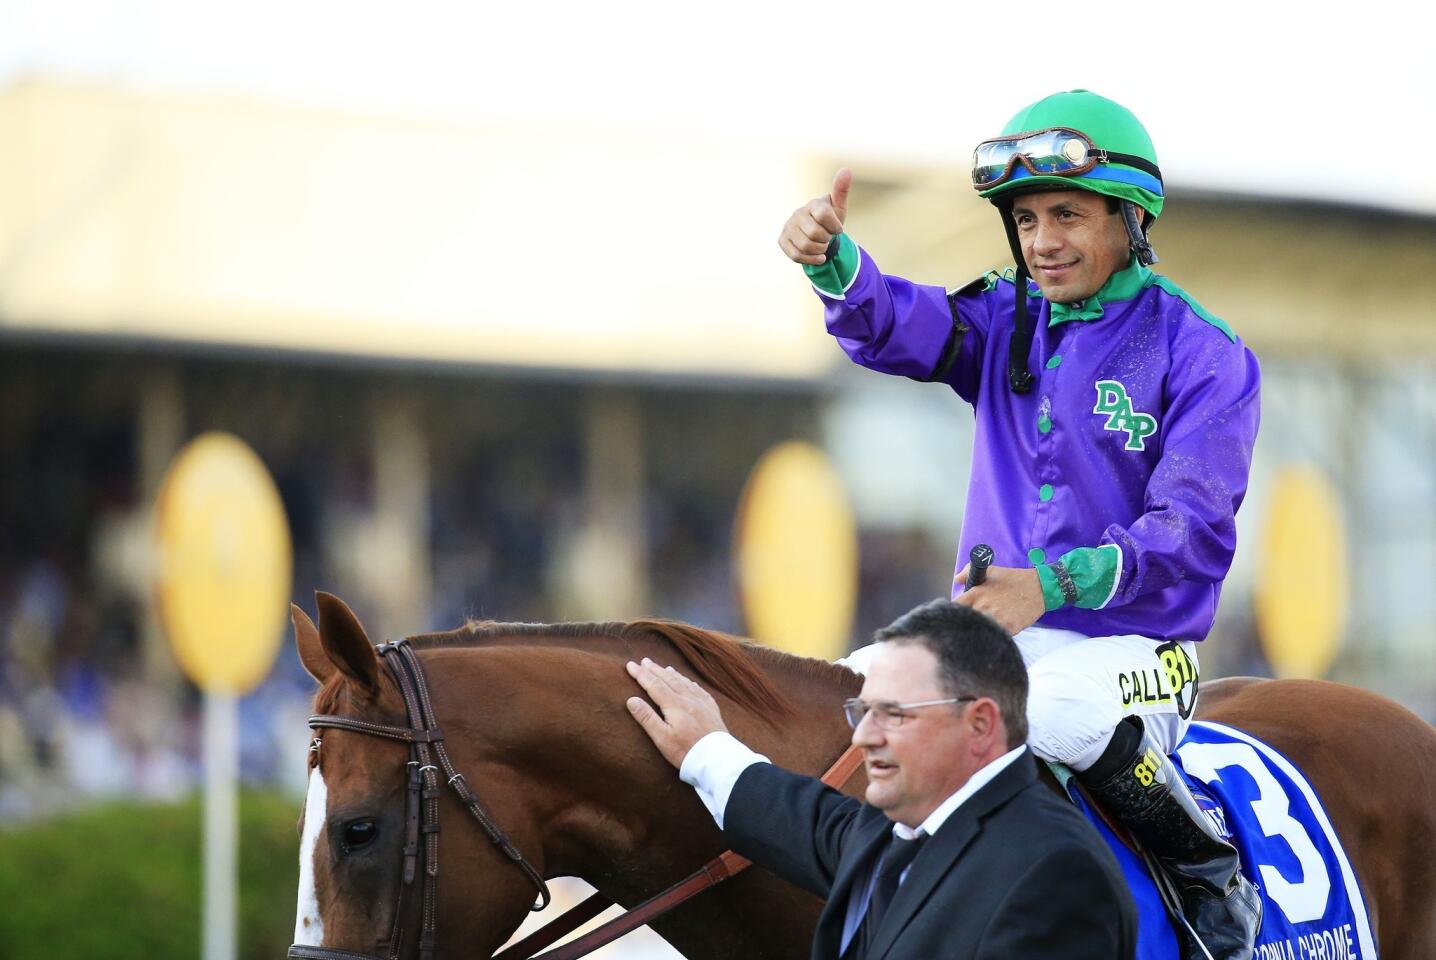 Jockey Victor Espinoza gives the thumbs-up sign as assistant trainer Alan Sherman greets California Chrome after his victory in the Preakness Stakes on Saturday at Pimlico Race Course in Baltimore.